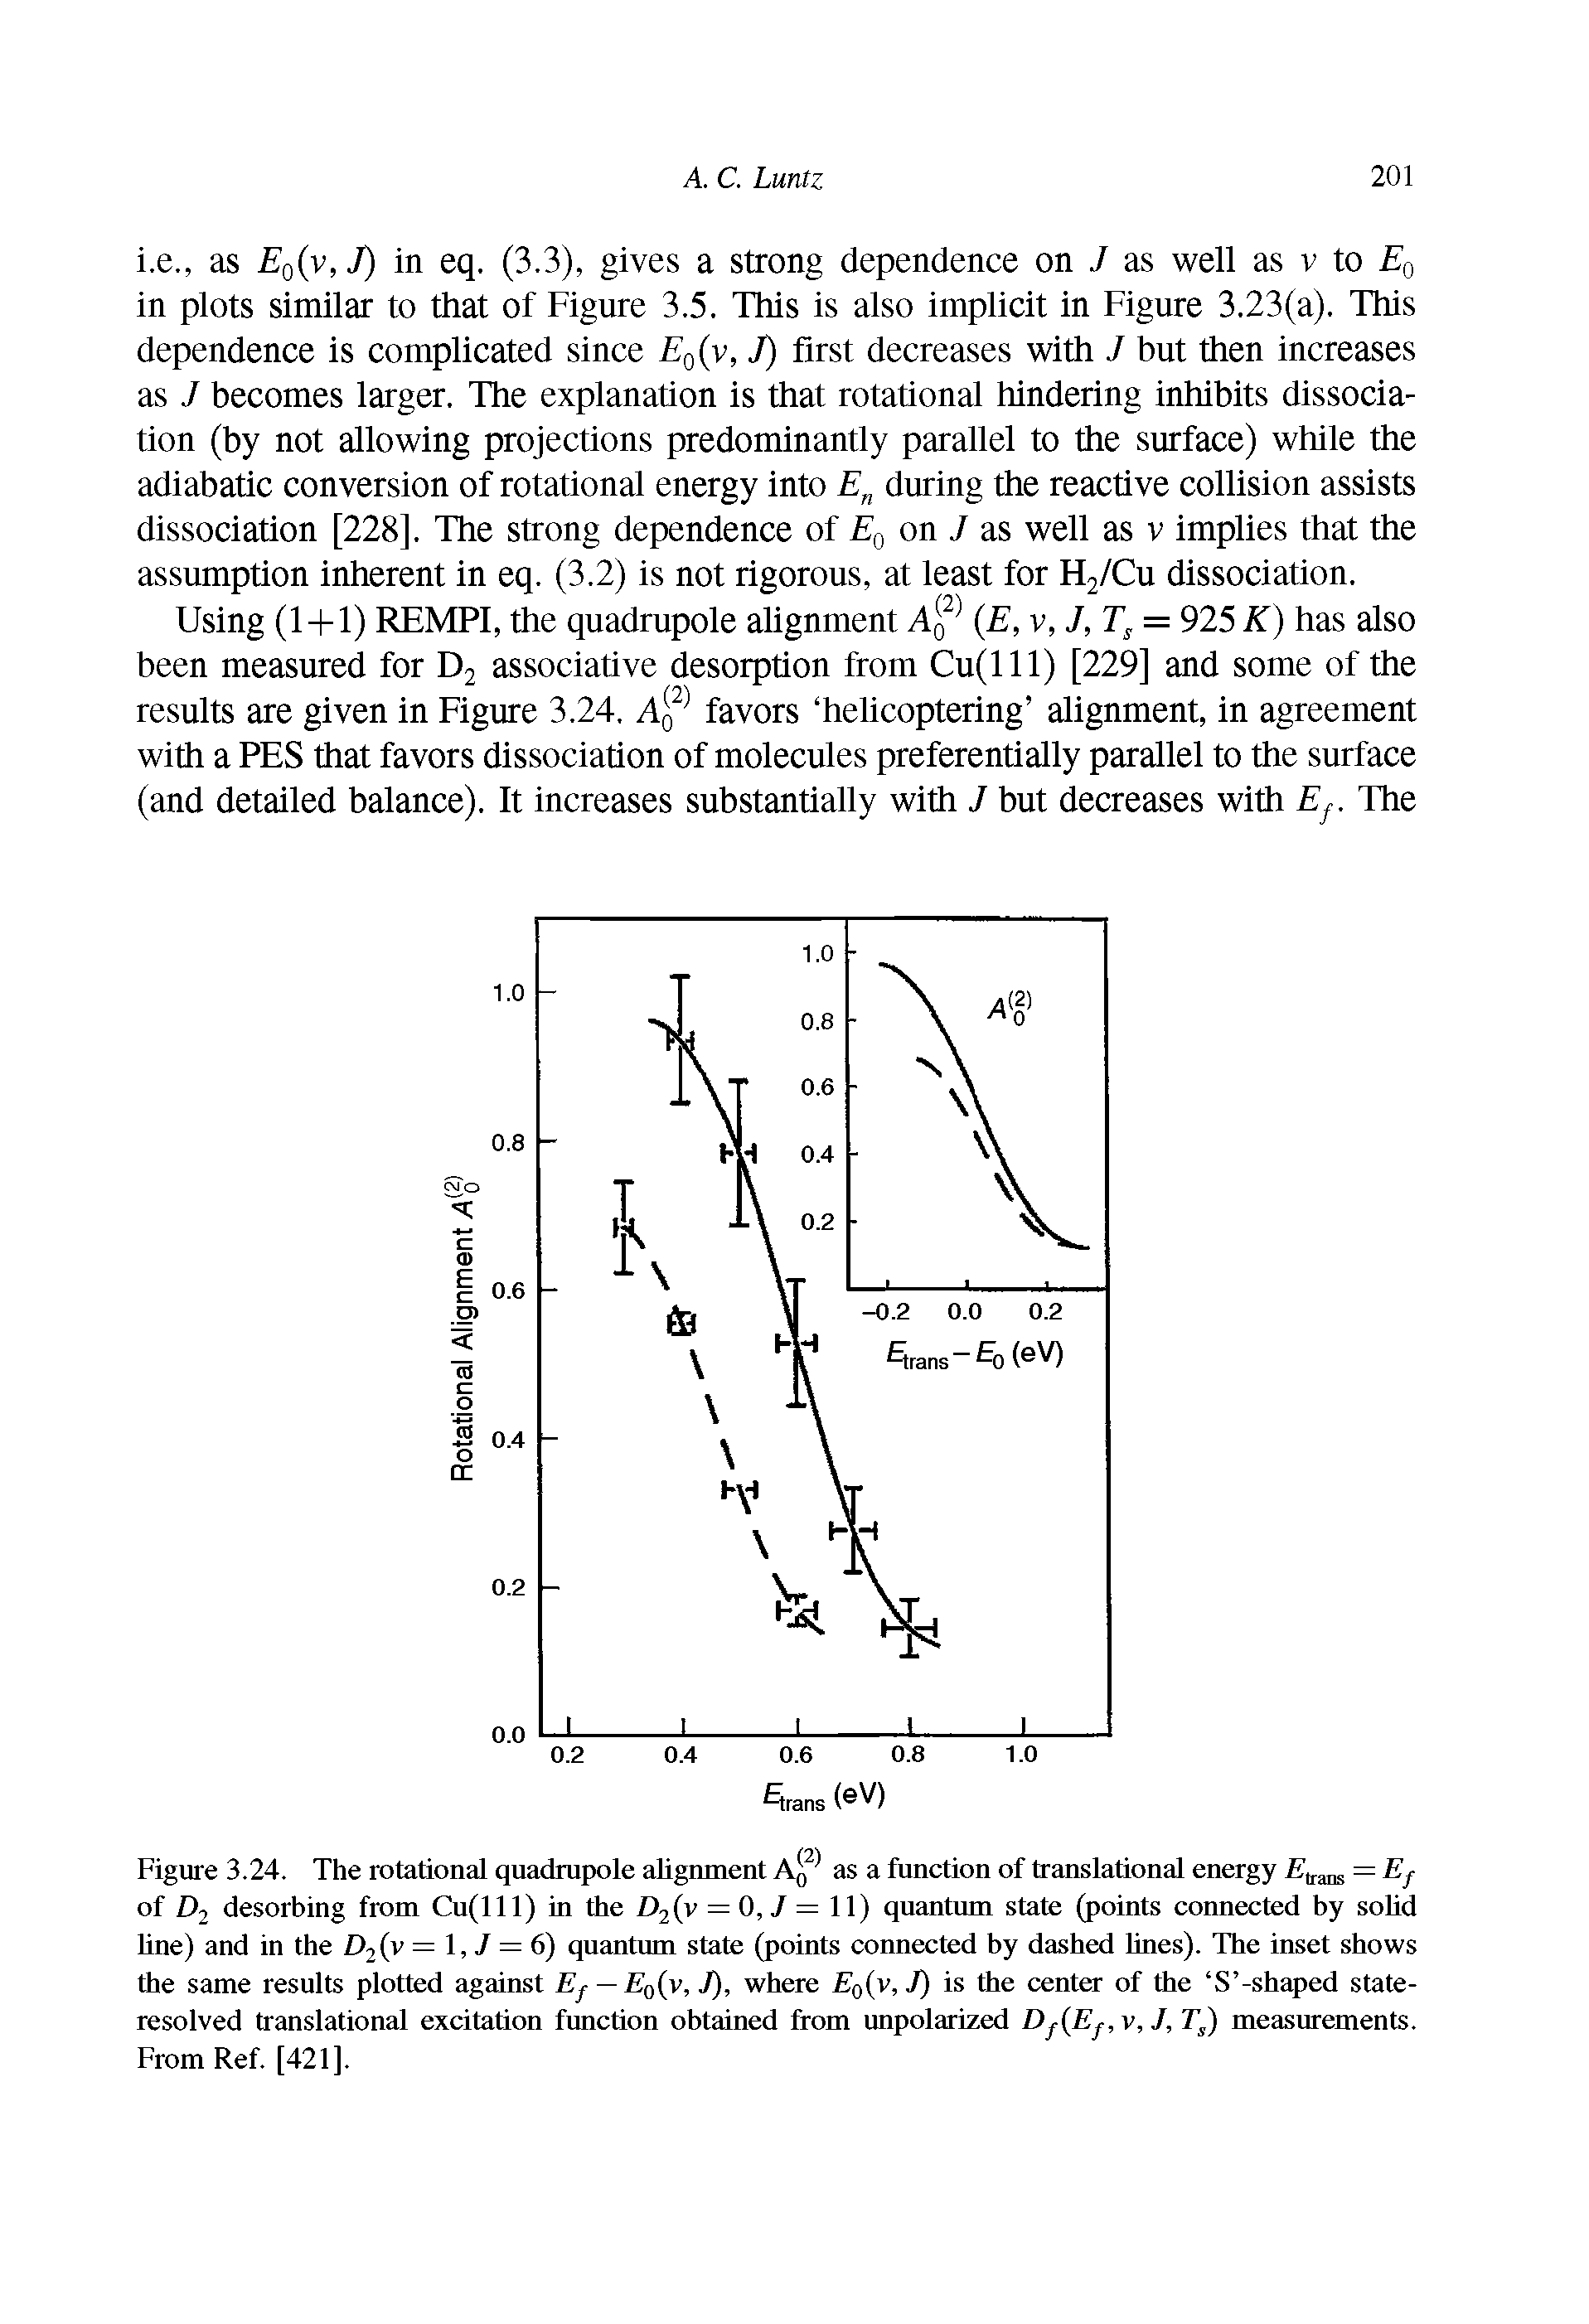 Figure 3.24. The rotational quadrupole alignment AJ asa function of translational energy /i ralls = Ef of D2 desorbing from Cu(lll) in the D2(v = 0, J = 11) quantum state (points connected by solid line) and in the D2(v = 1, J = 6) quantum state (points connected by dashed lines). The inset shows the same results plotted against Ef — E0(v, J), where E0(v, J) is the center of the S -shaped state-resolved translational excitation function obtained from unpolarized Df(Ef, v, J, Ts) measurements. From Ref. [421].